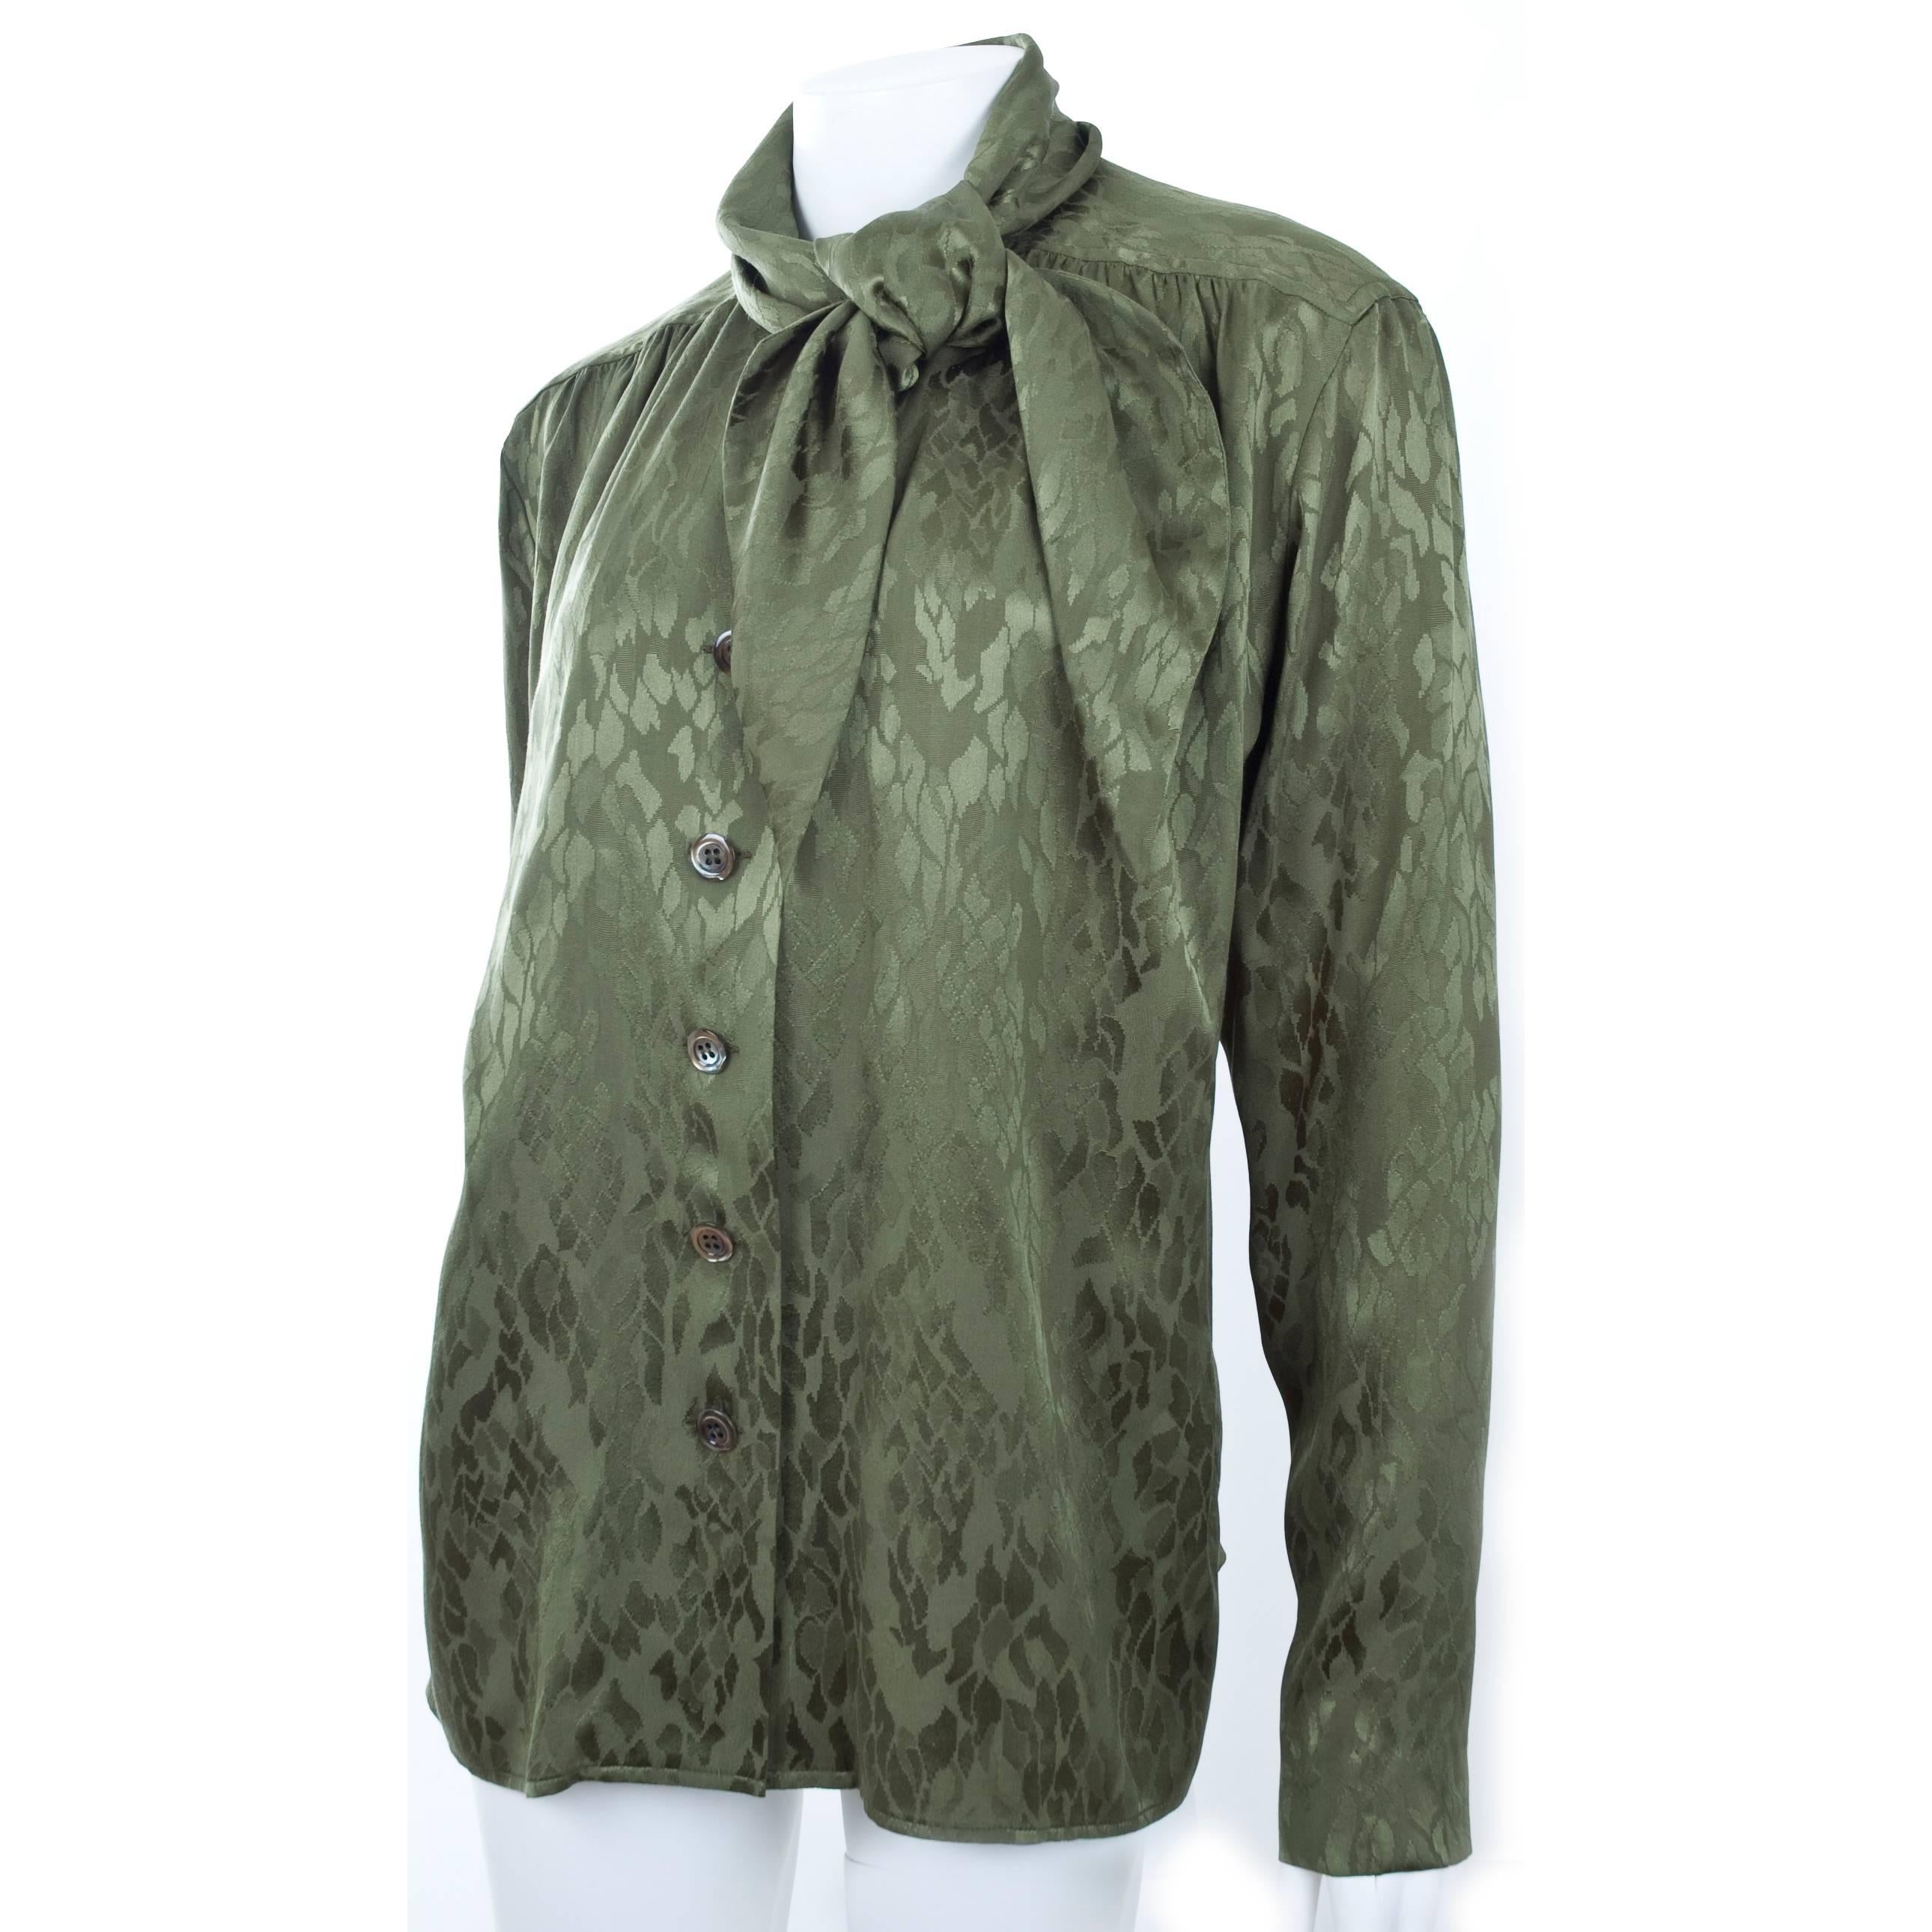 80s Vintage YVES SAINT LAURENT green silk jacquard blouse with tie neckline.
Size French 40 about US 6
Excellent condition - no flaws to mention
Measurements:
Length 26 - bust up to 40 inches.